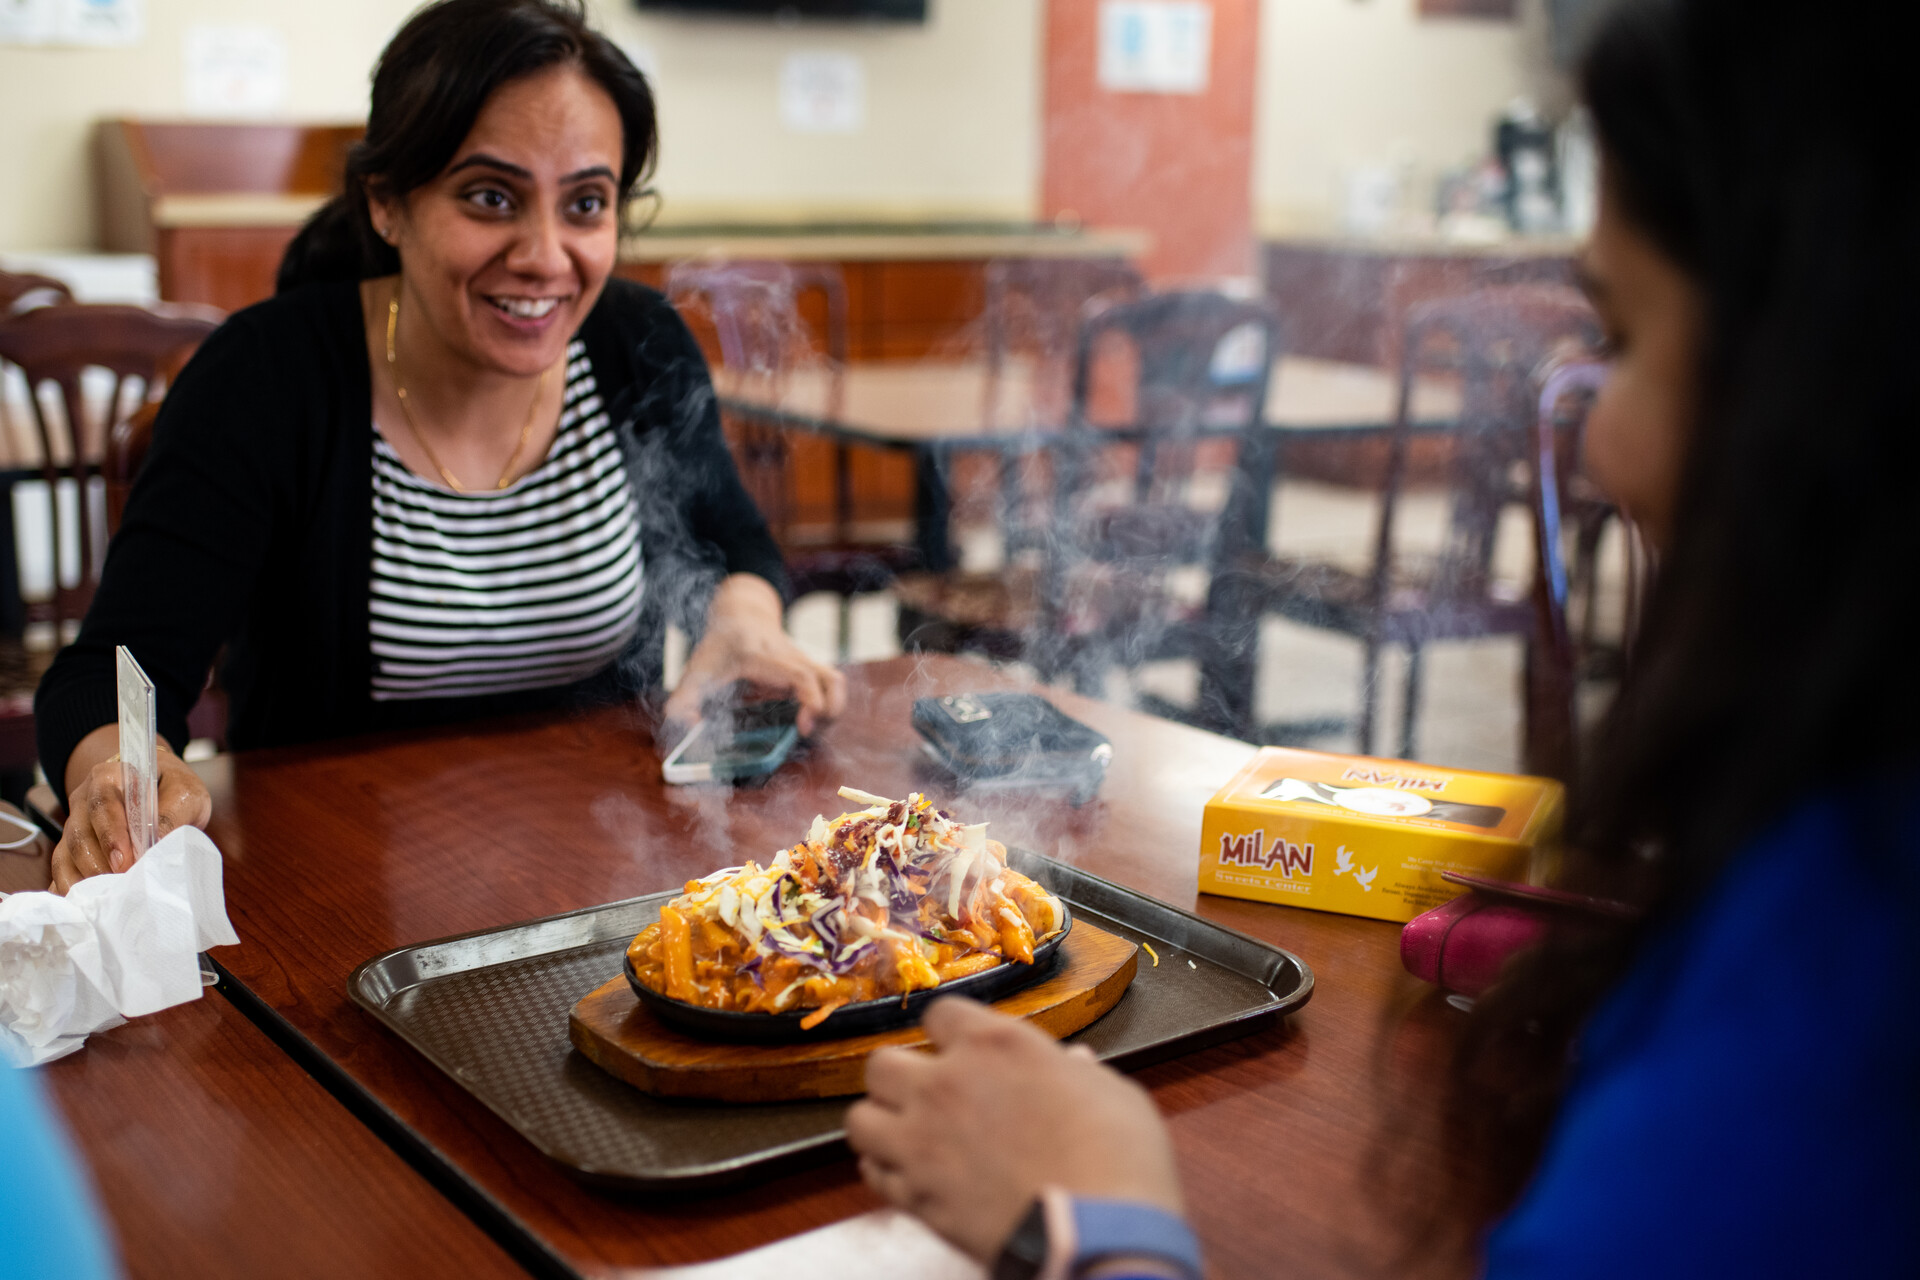 Customers look on with delight as they prepare to eat their samosa sizzler.